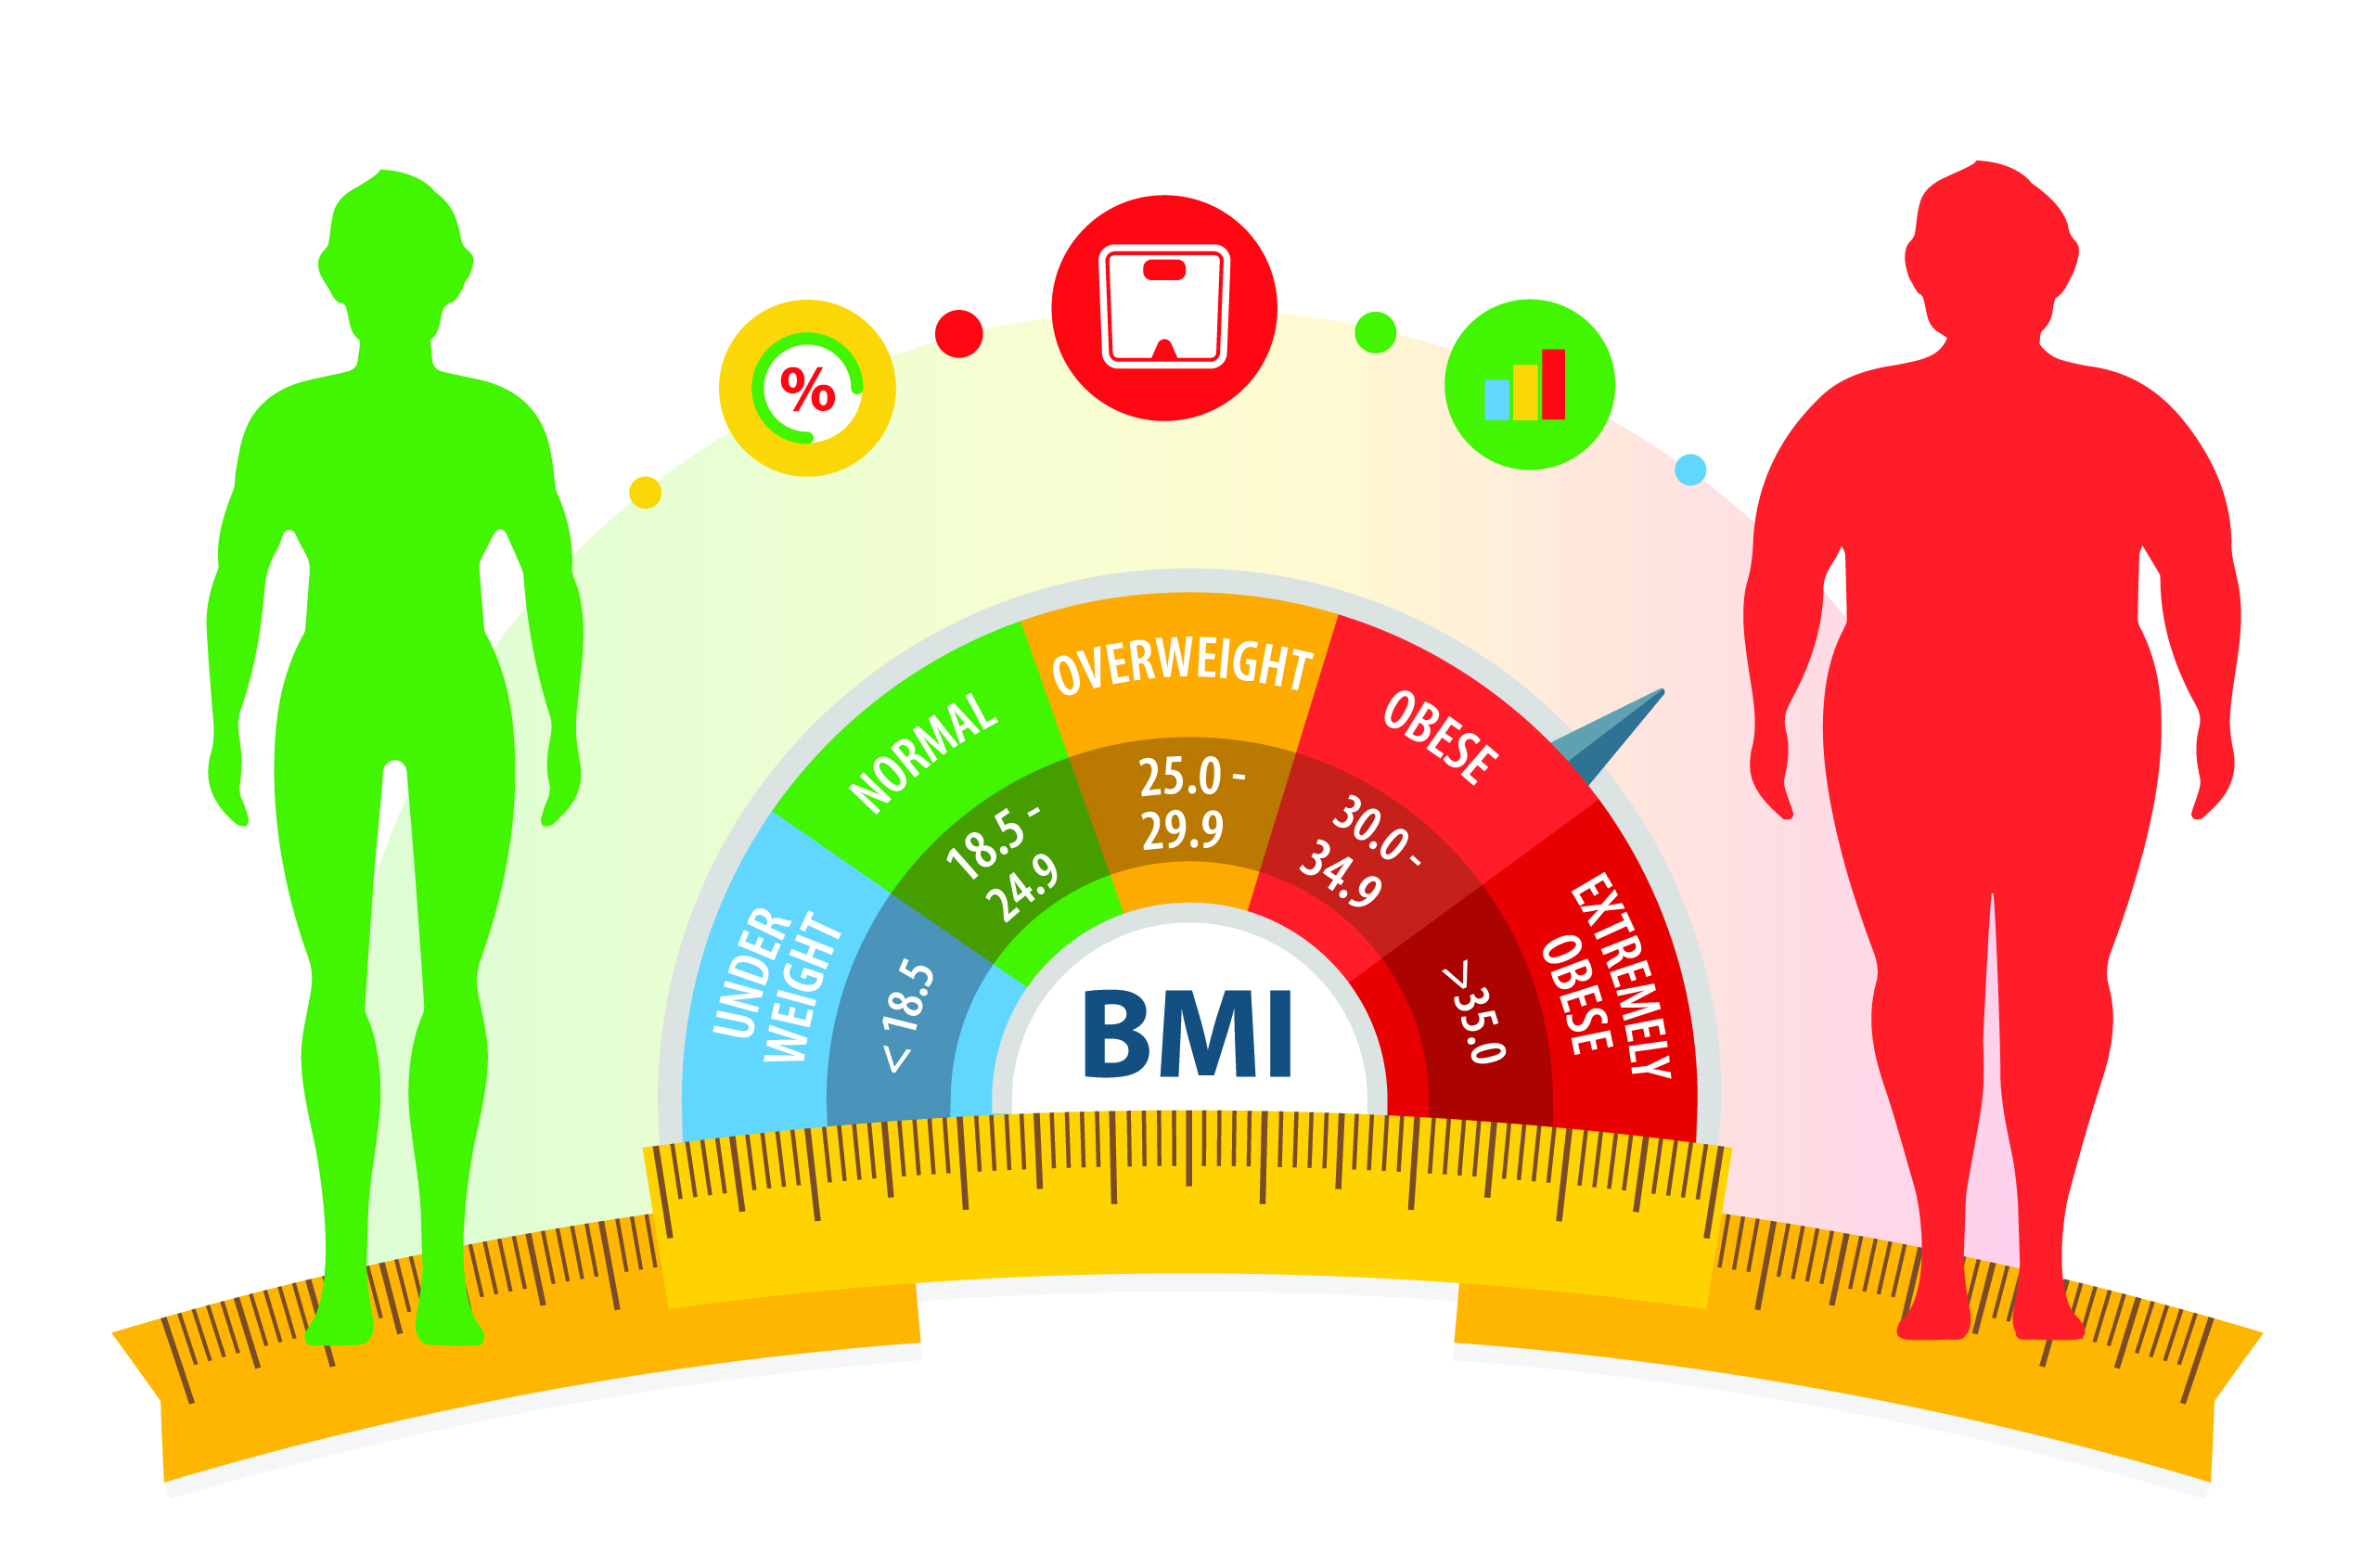 BMI for 6’3 males and females